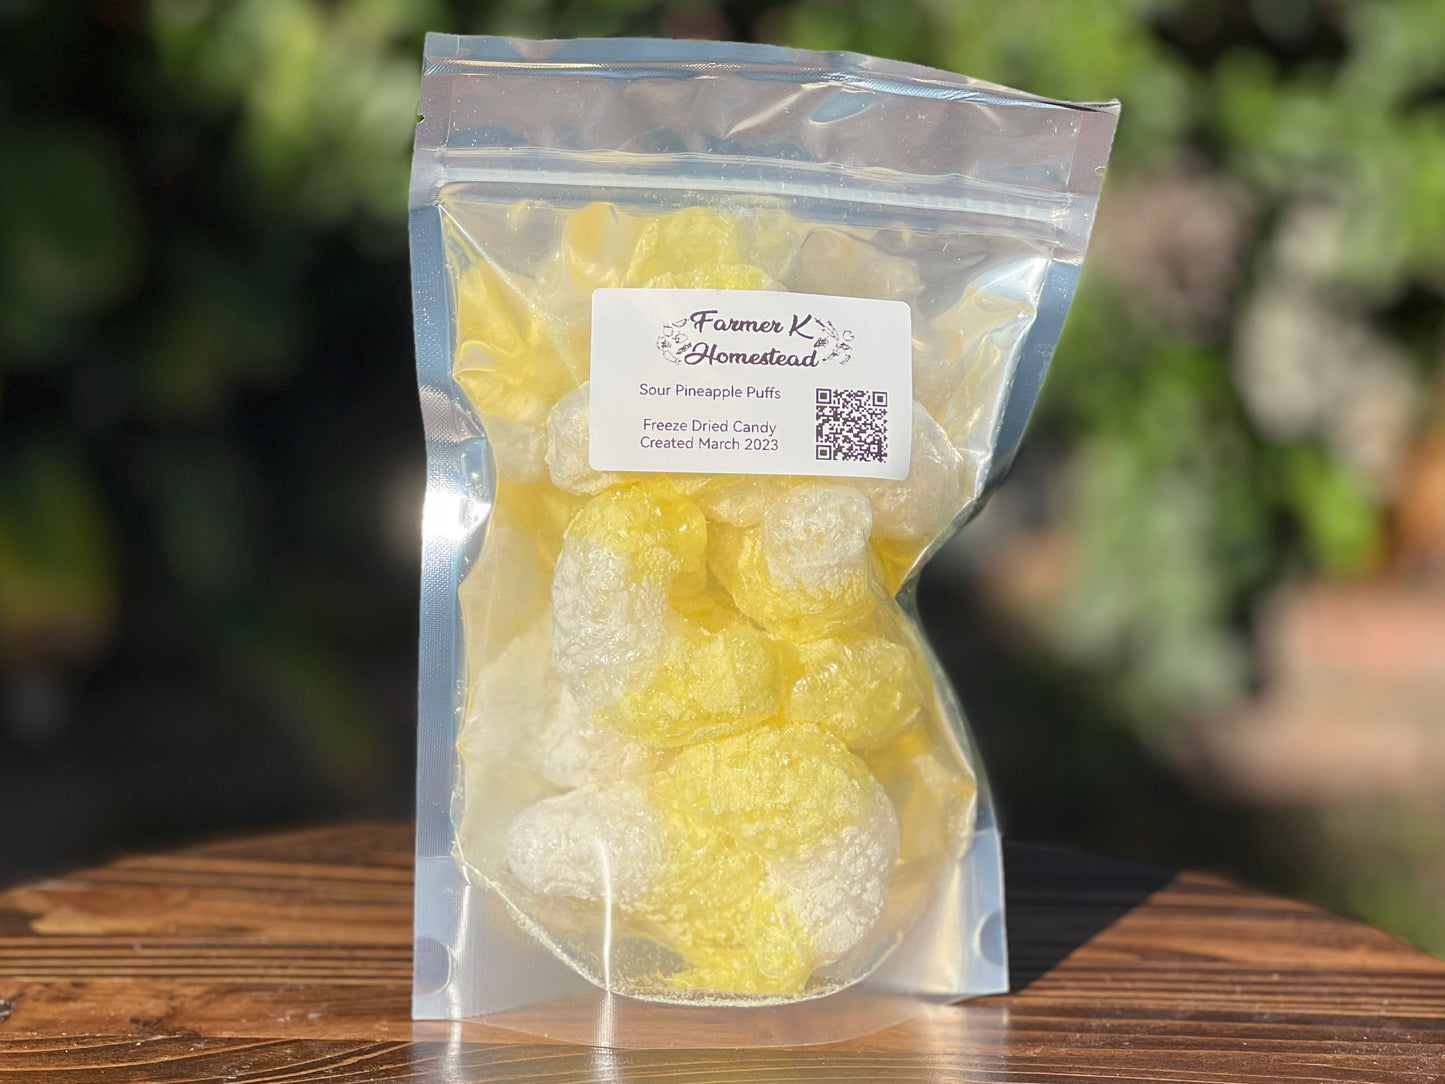 Sour Pineapple Puffs Freeze Dried Candy - 1.25oz